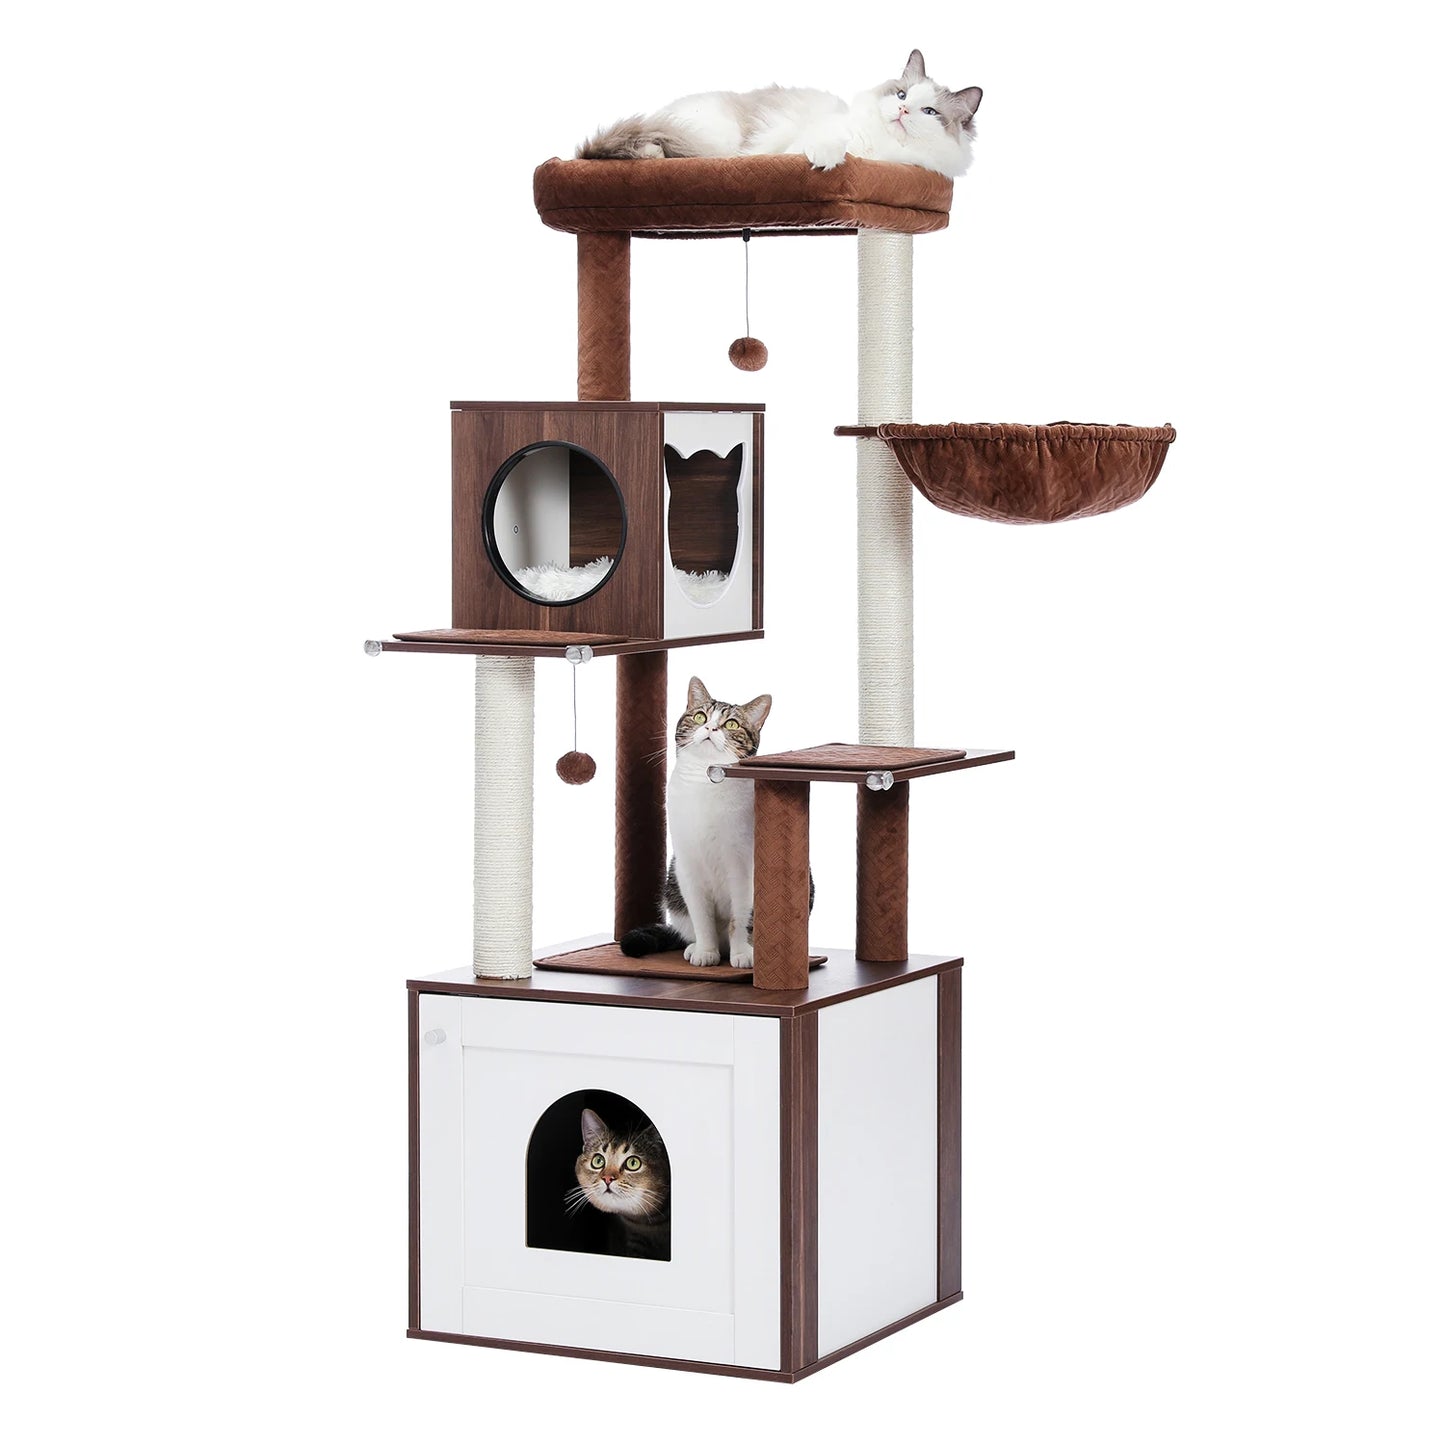 Luxury Cat Tree Condo Cabinet Multi-Layer Cat Tower Natural Sisal Scratching Post for Feline Large Perch Nest 3 Colors Furniture